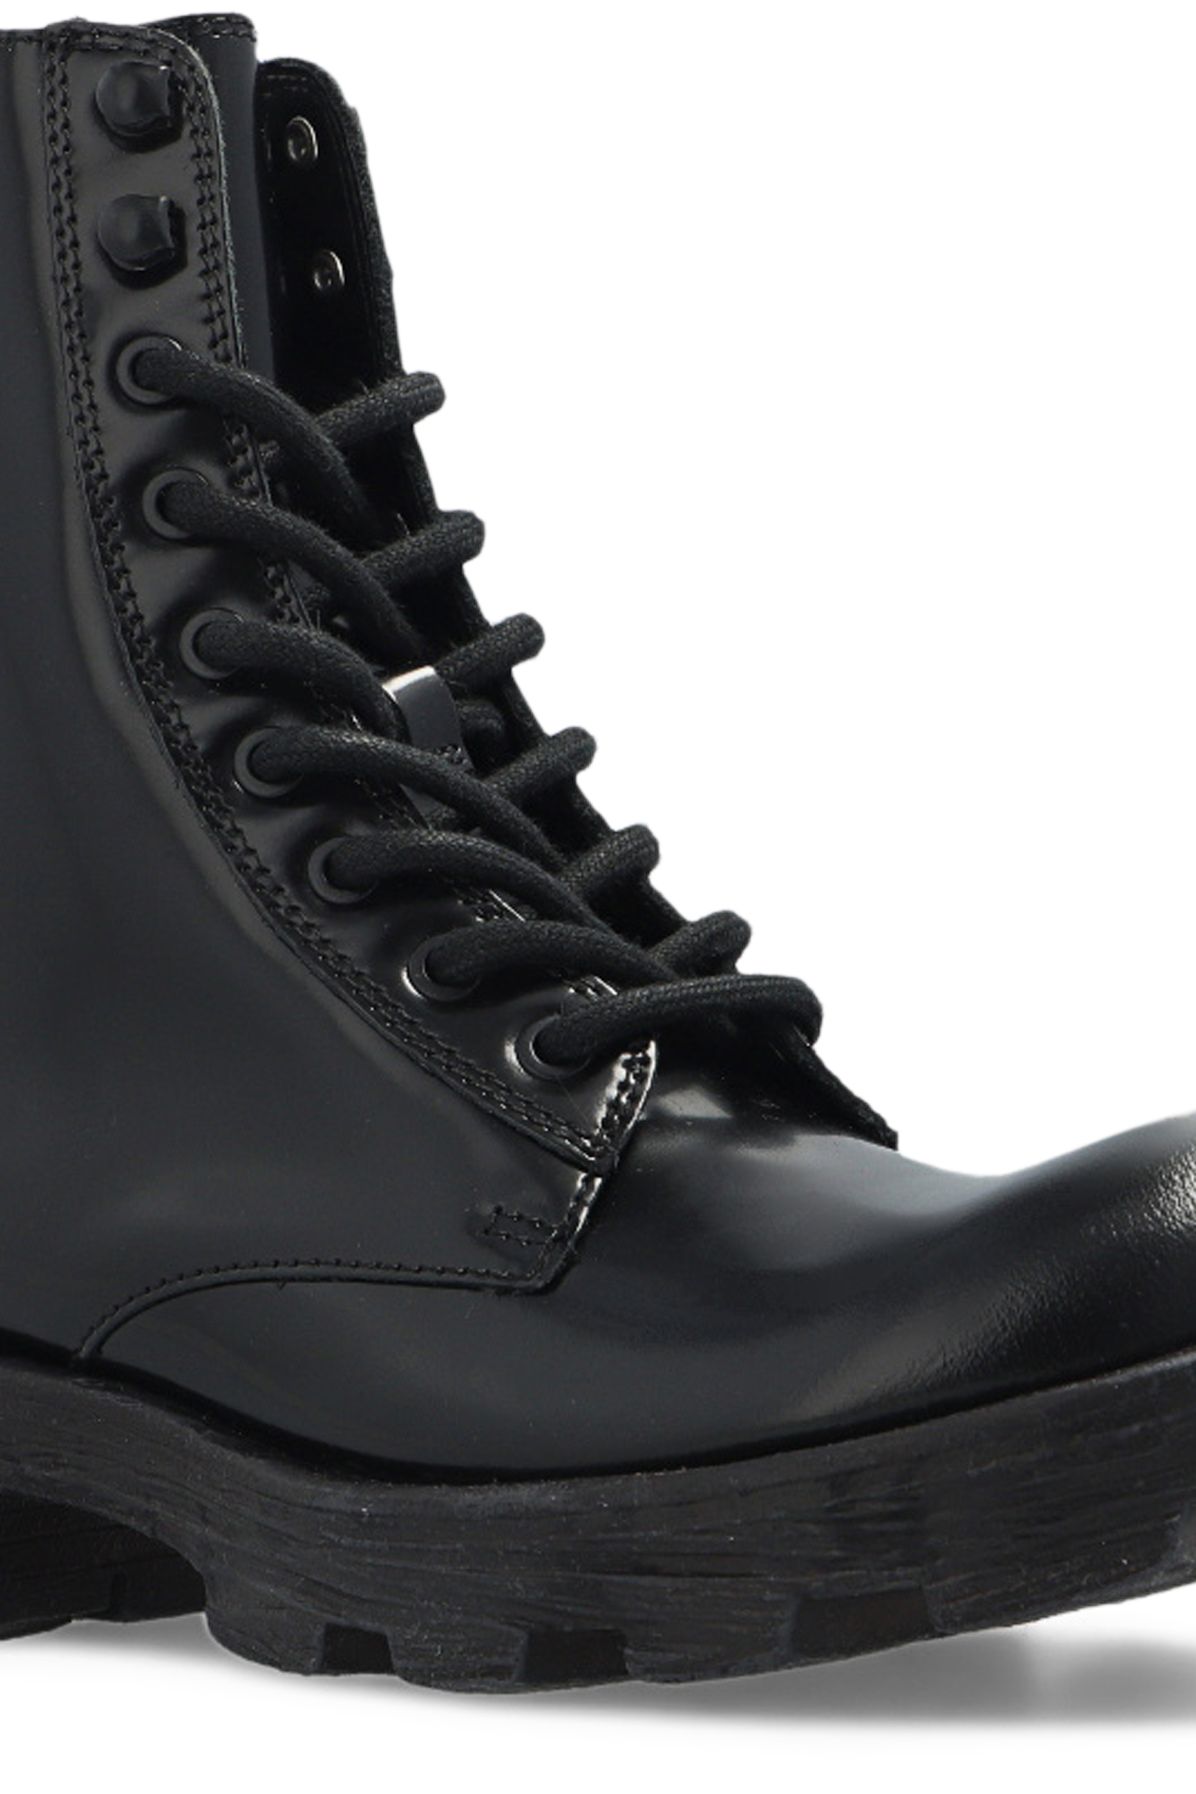 Diesel D-HAMMER leather boots